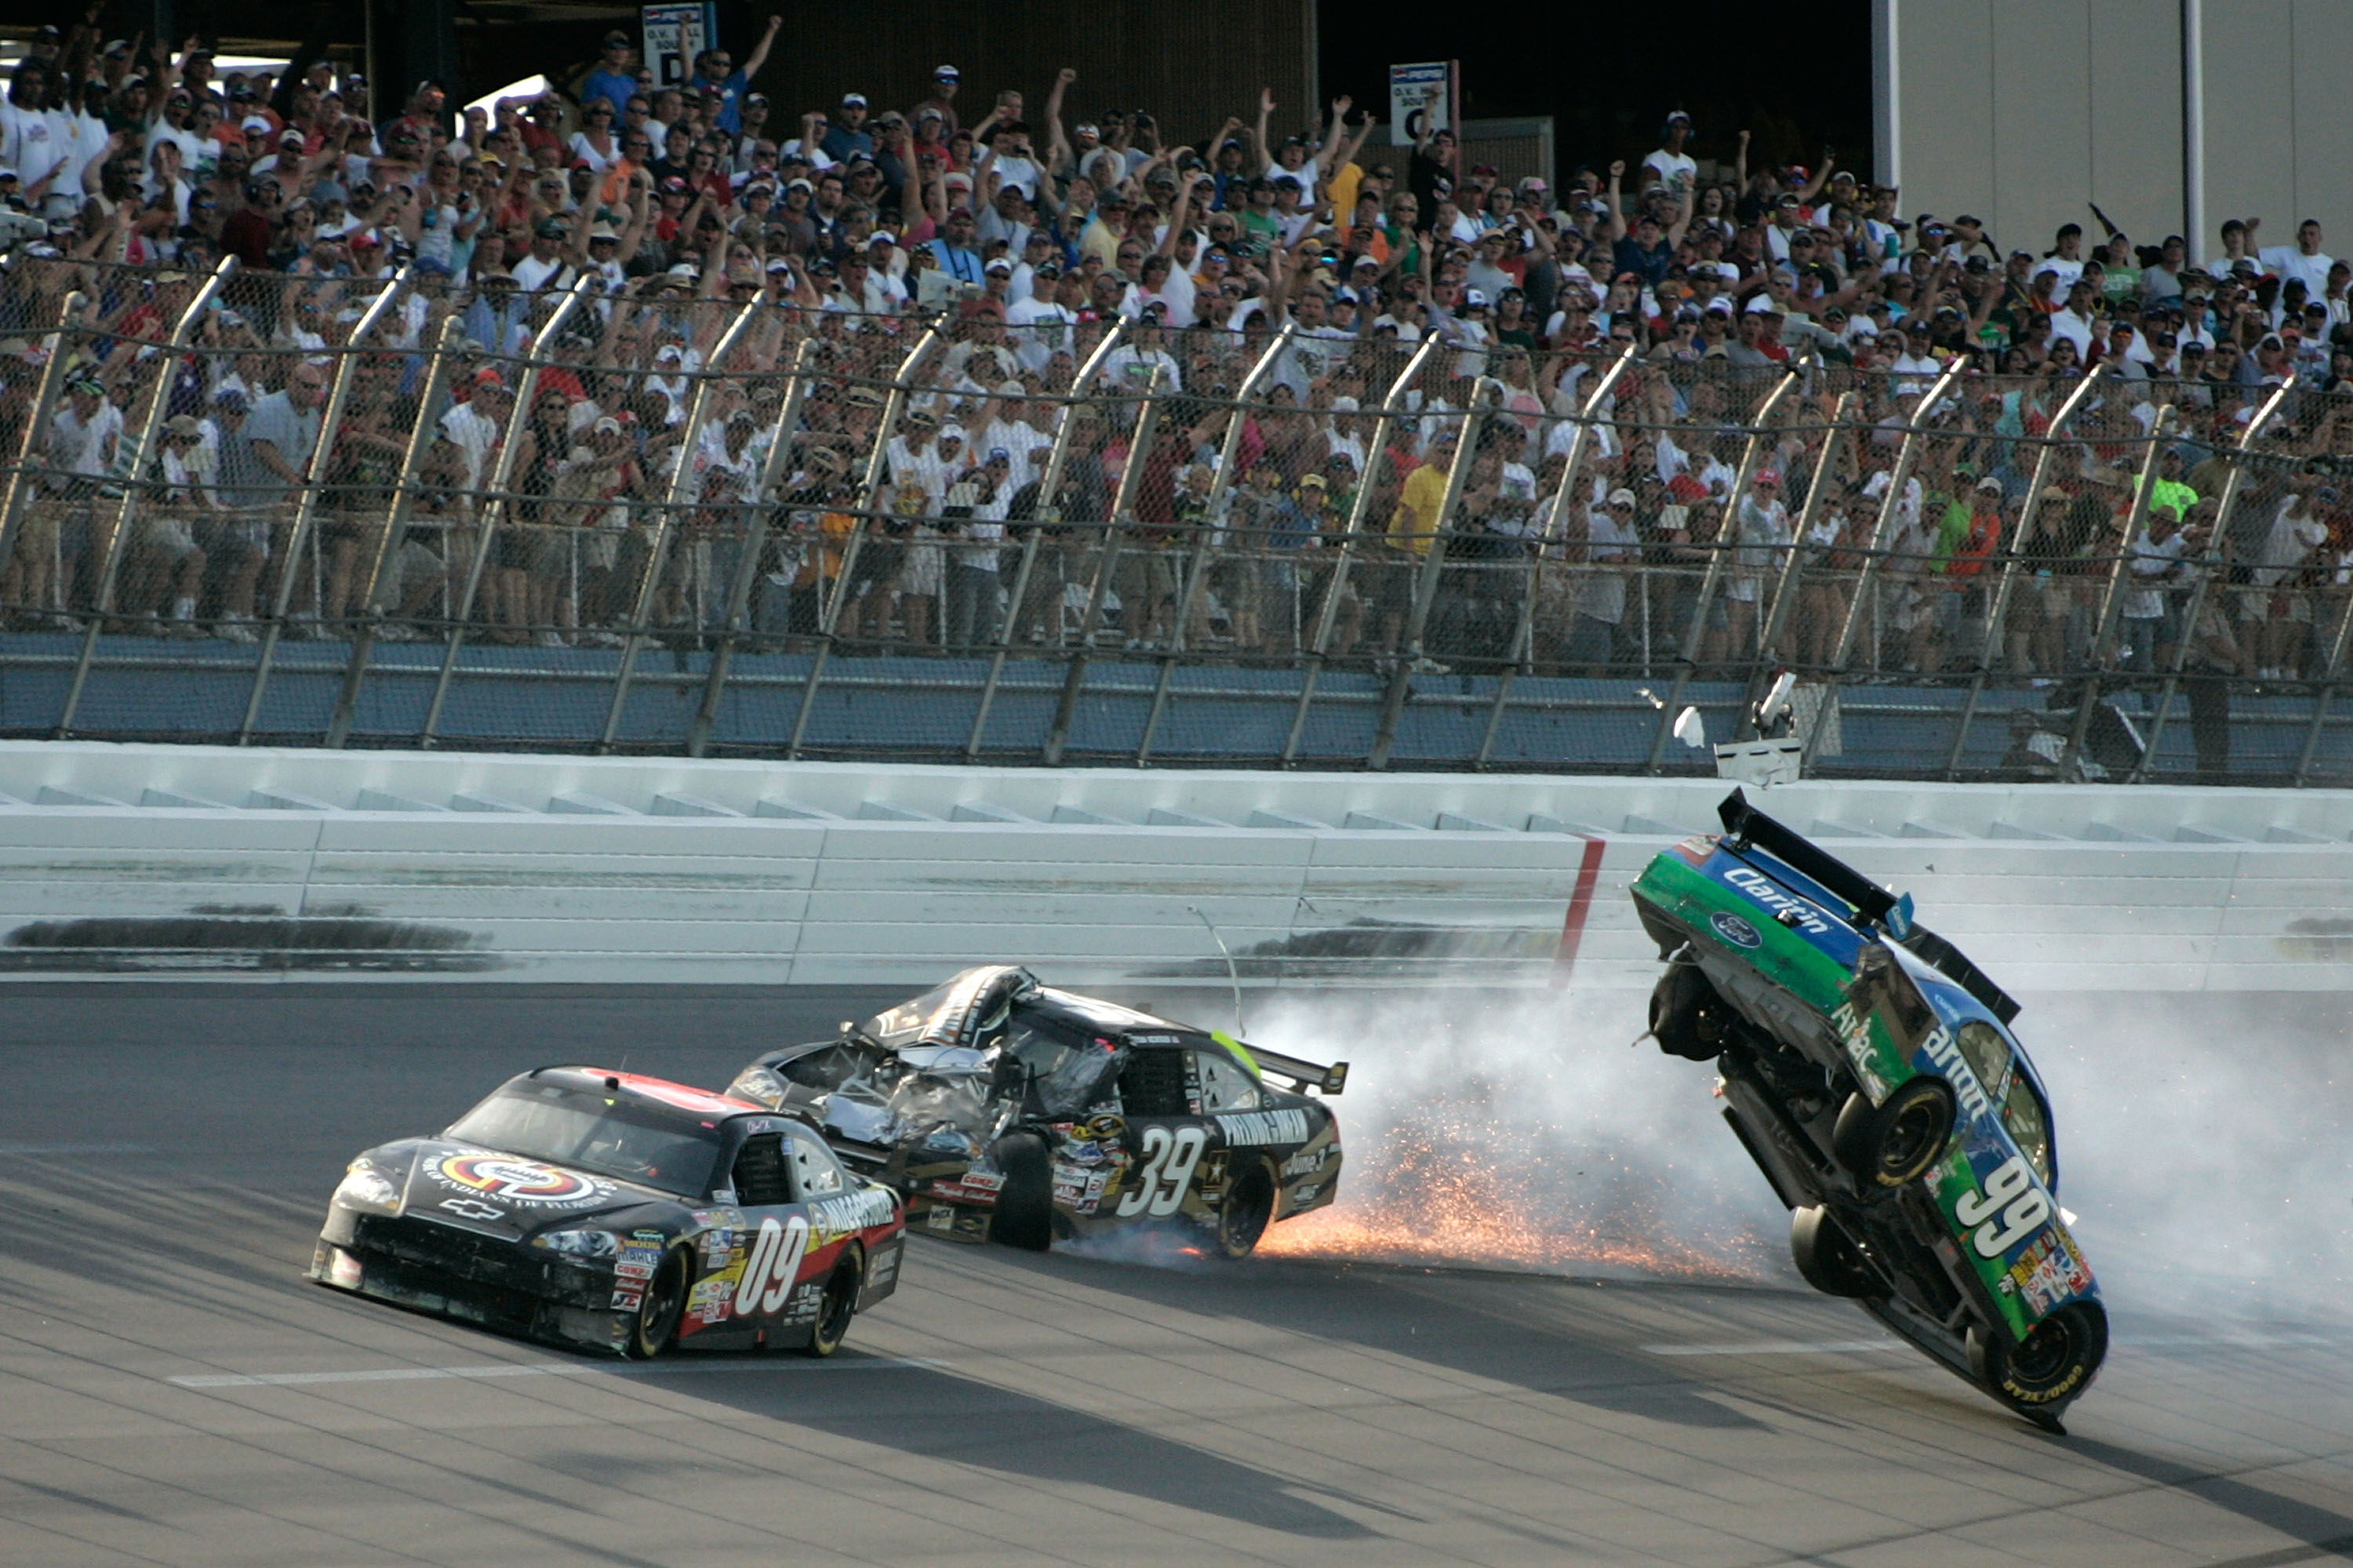 TALLADEGA, AL - APRIL 26: Carl Edwards, driver of the #99 Claritin Ford, goes airborne as Ryan Newman, driver of the #39 Steweart-Haas Racing Chevrolet suffers damage and Brad Keselowski, driver of the #09 Miccosukee Indian Gaming Chevrolet drives at the conclusion of the NASCAR Sprint Cup Series Aaron